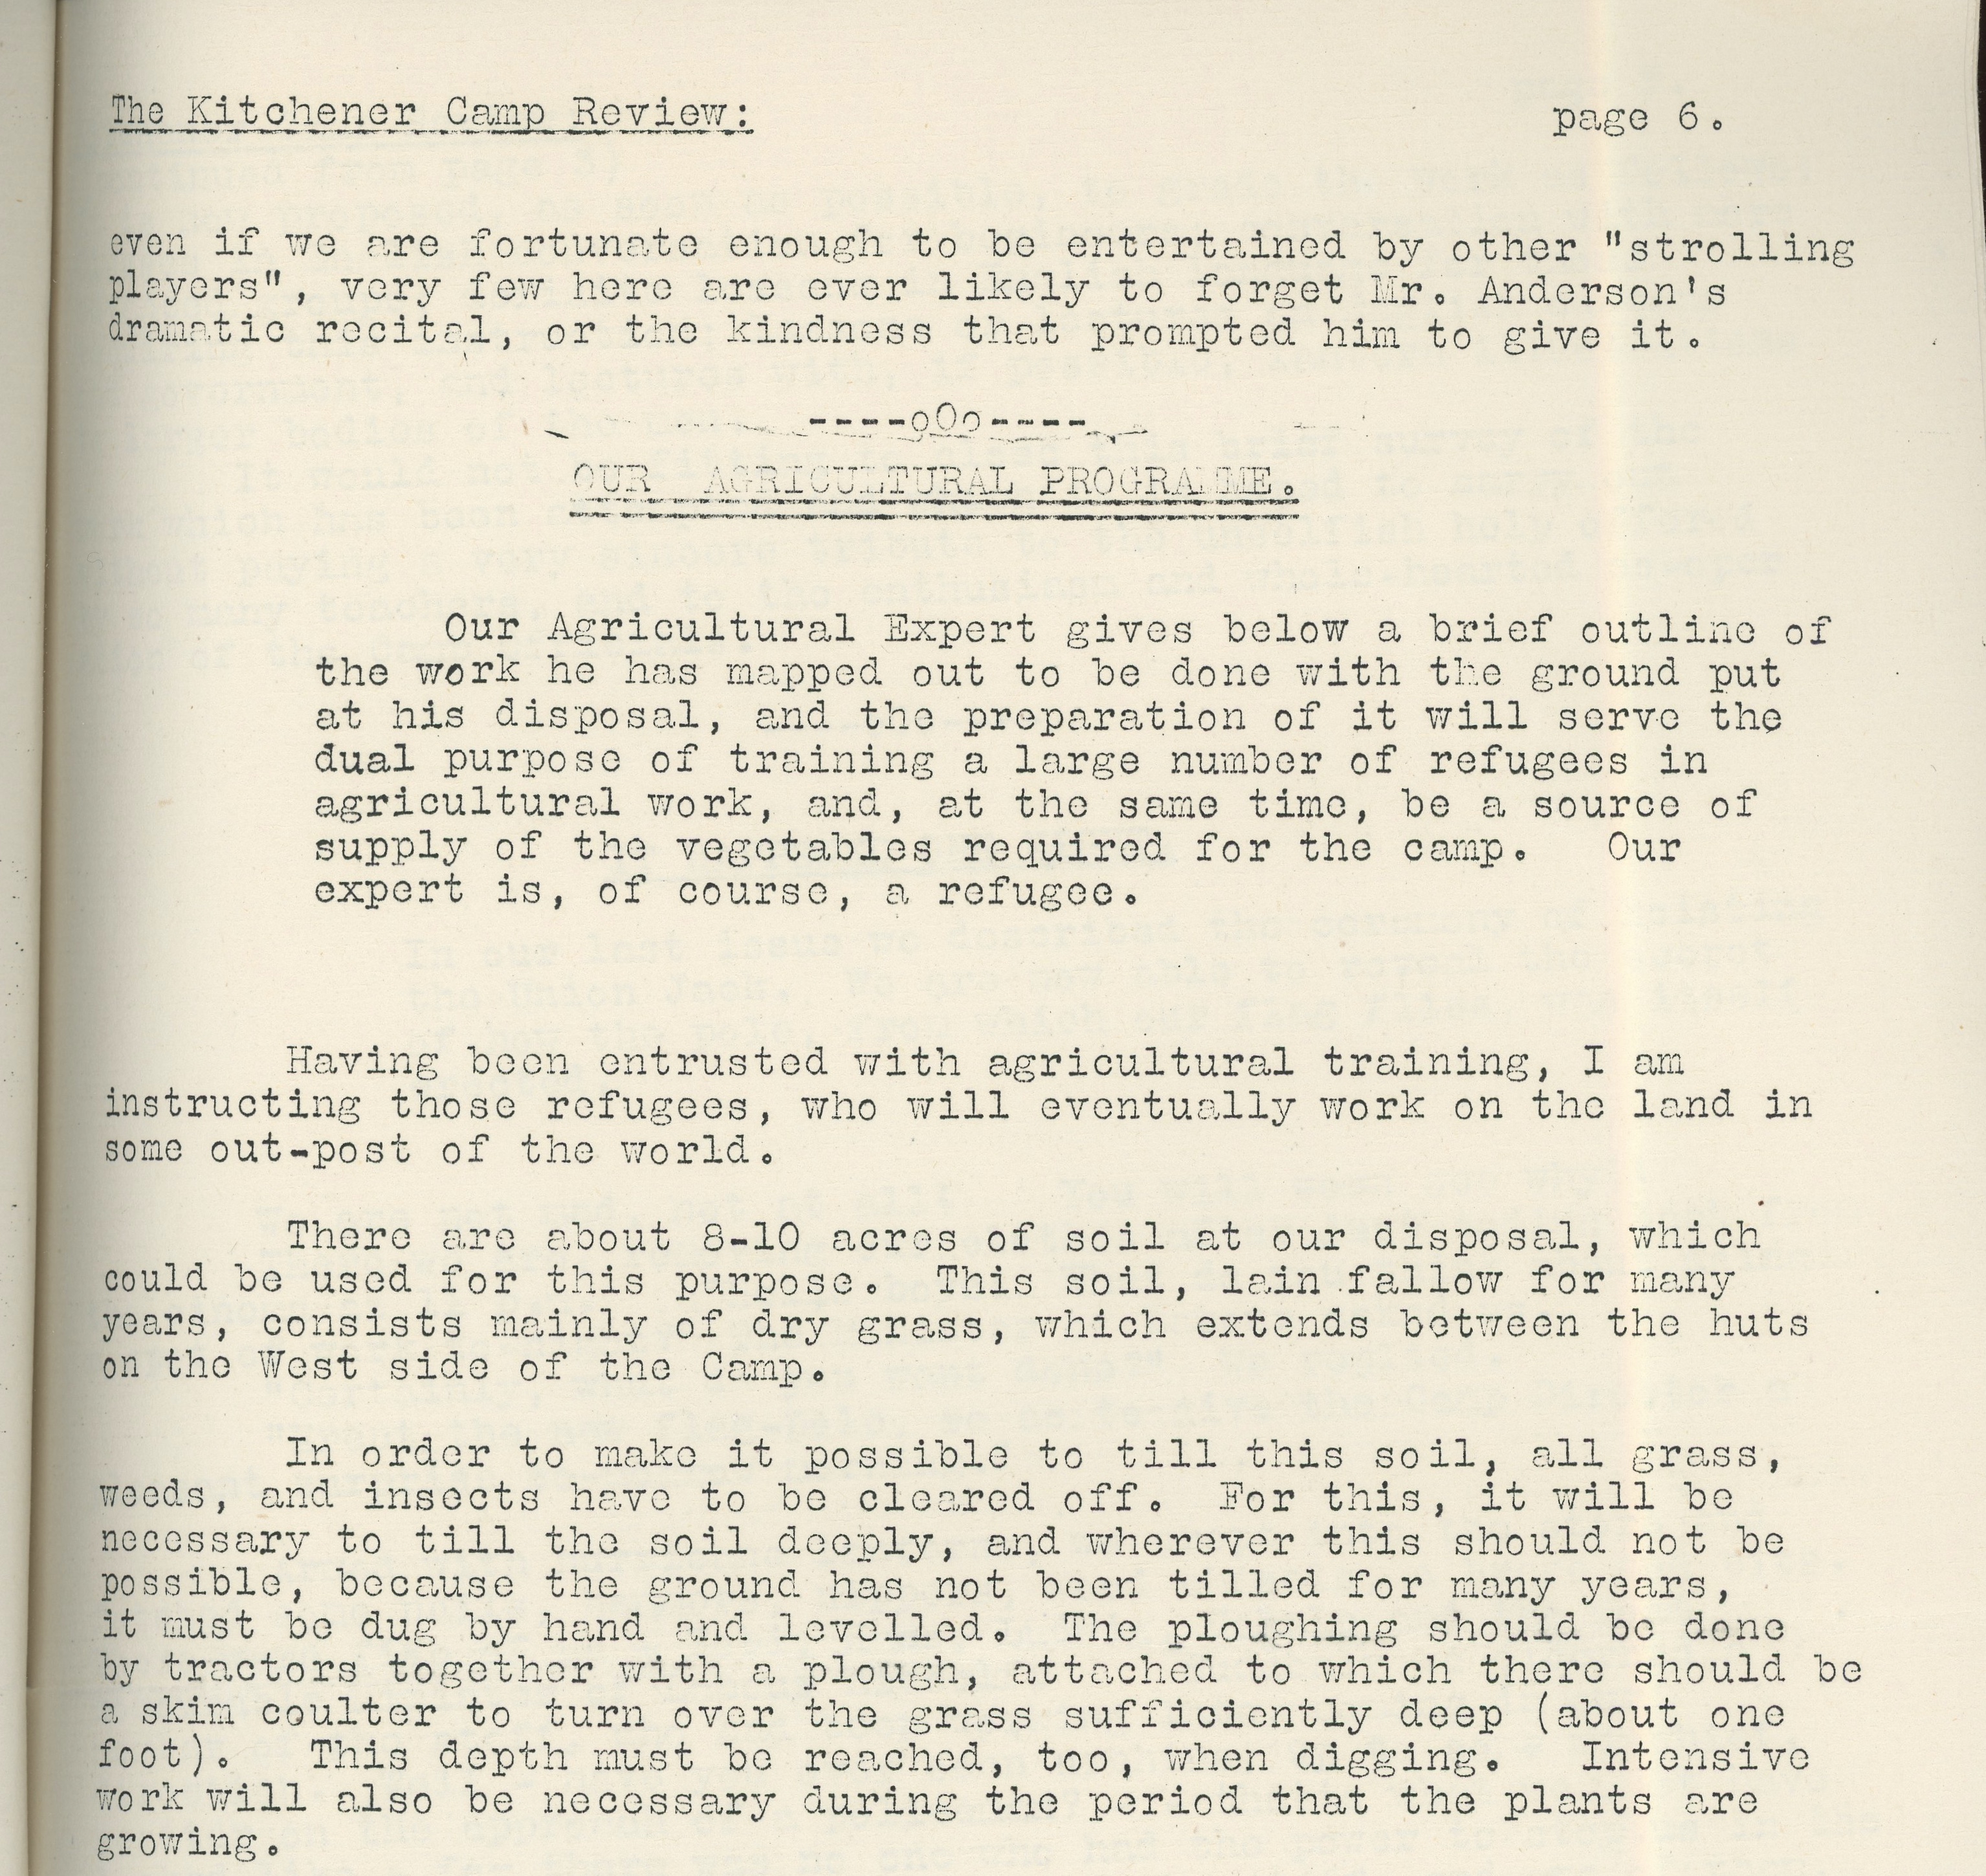 Kitchener Camp Review, April 1939, page 6, top